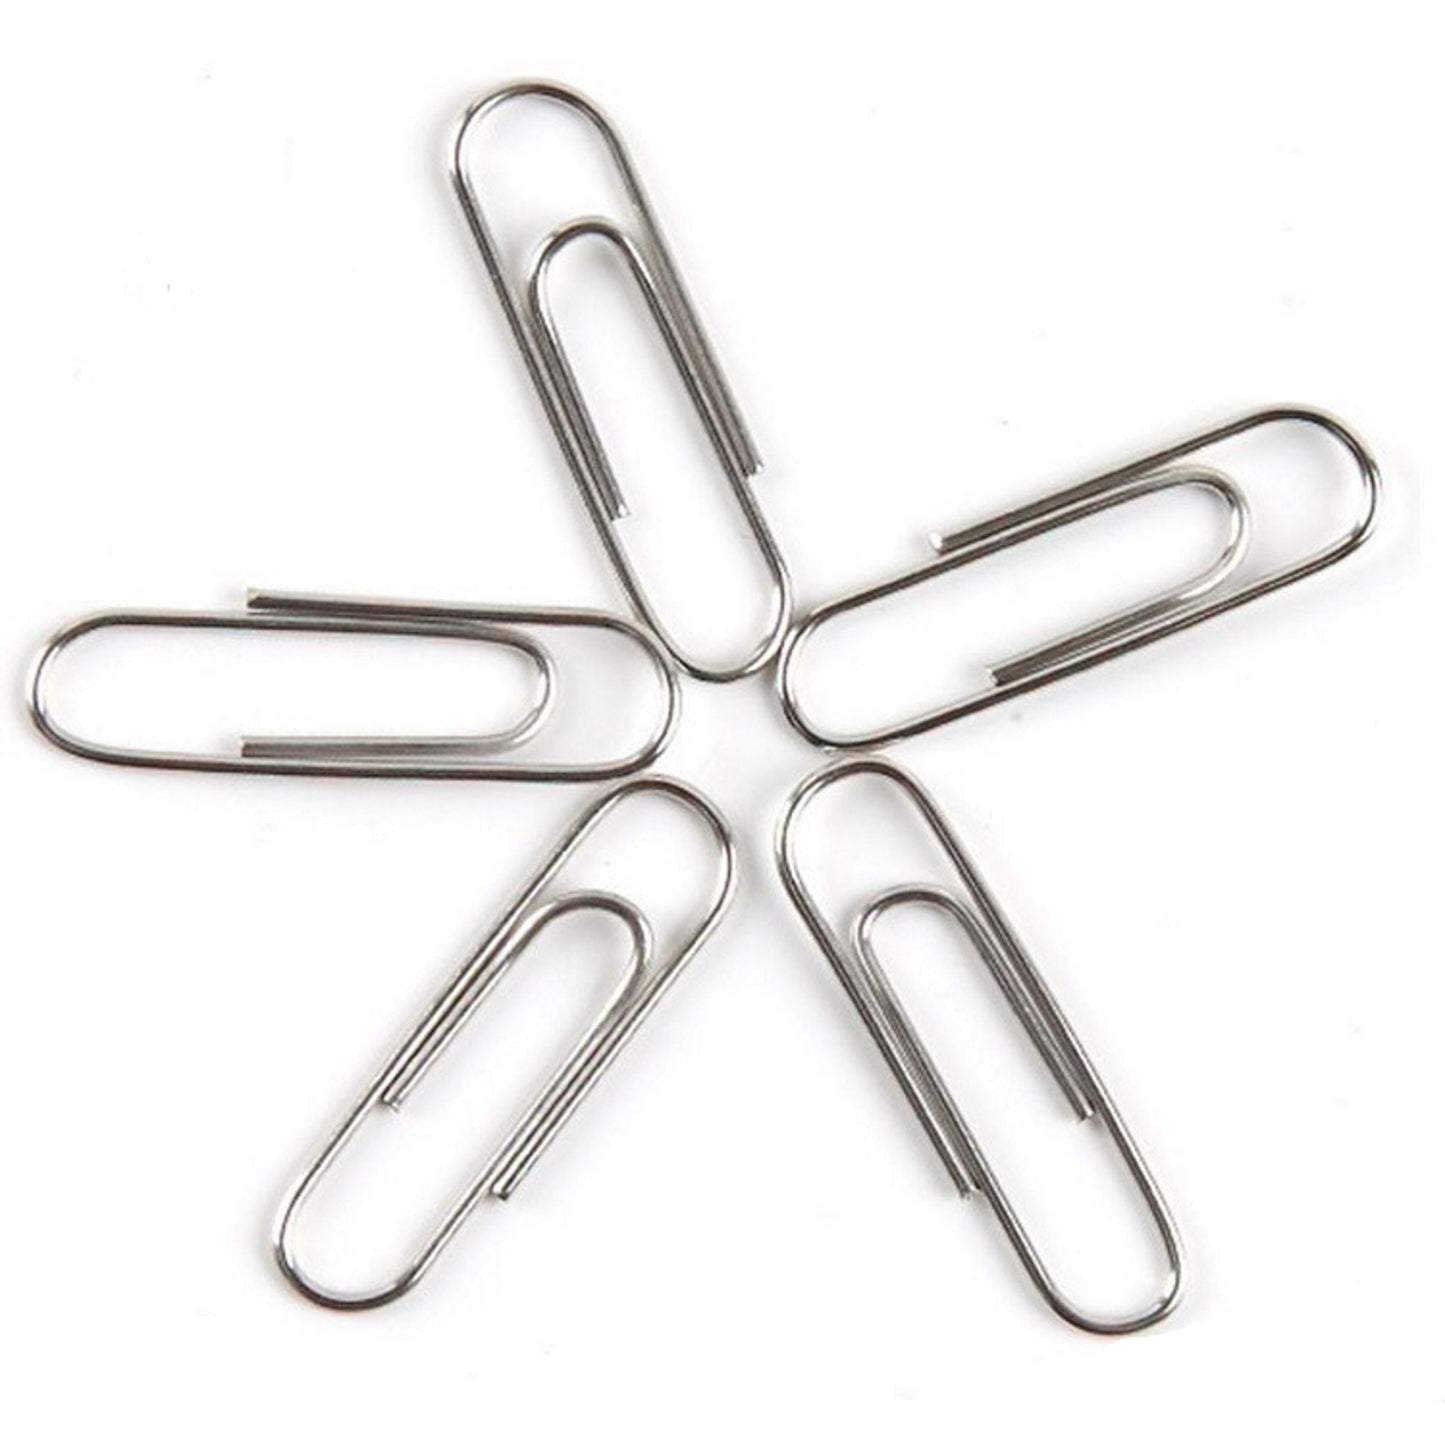 NiftyPlaza Large Jumbo Paper Clips (50mm) 100-Count Silver Smooth Finish, Craft, Home, School, Office